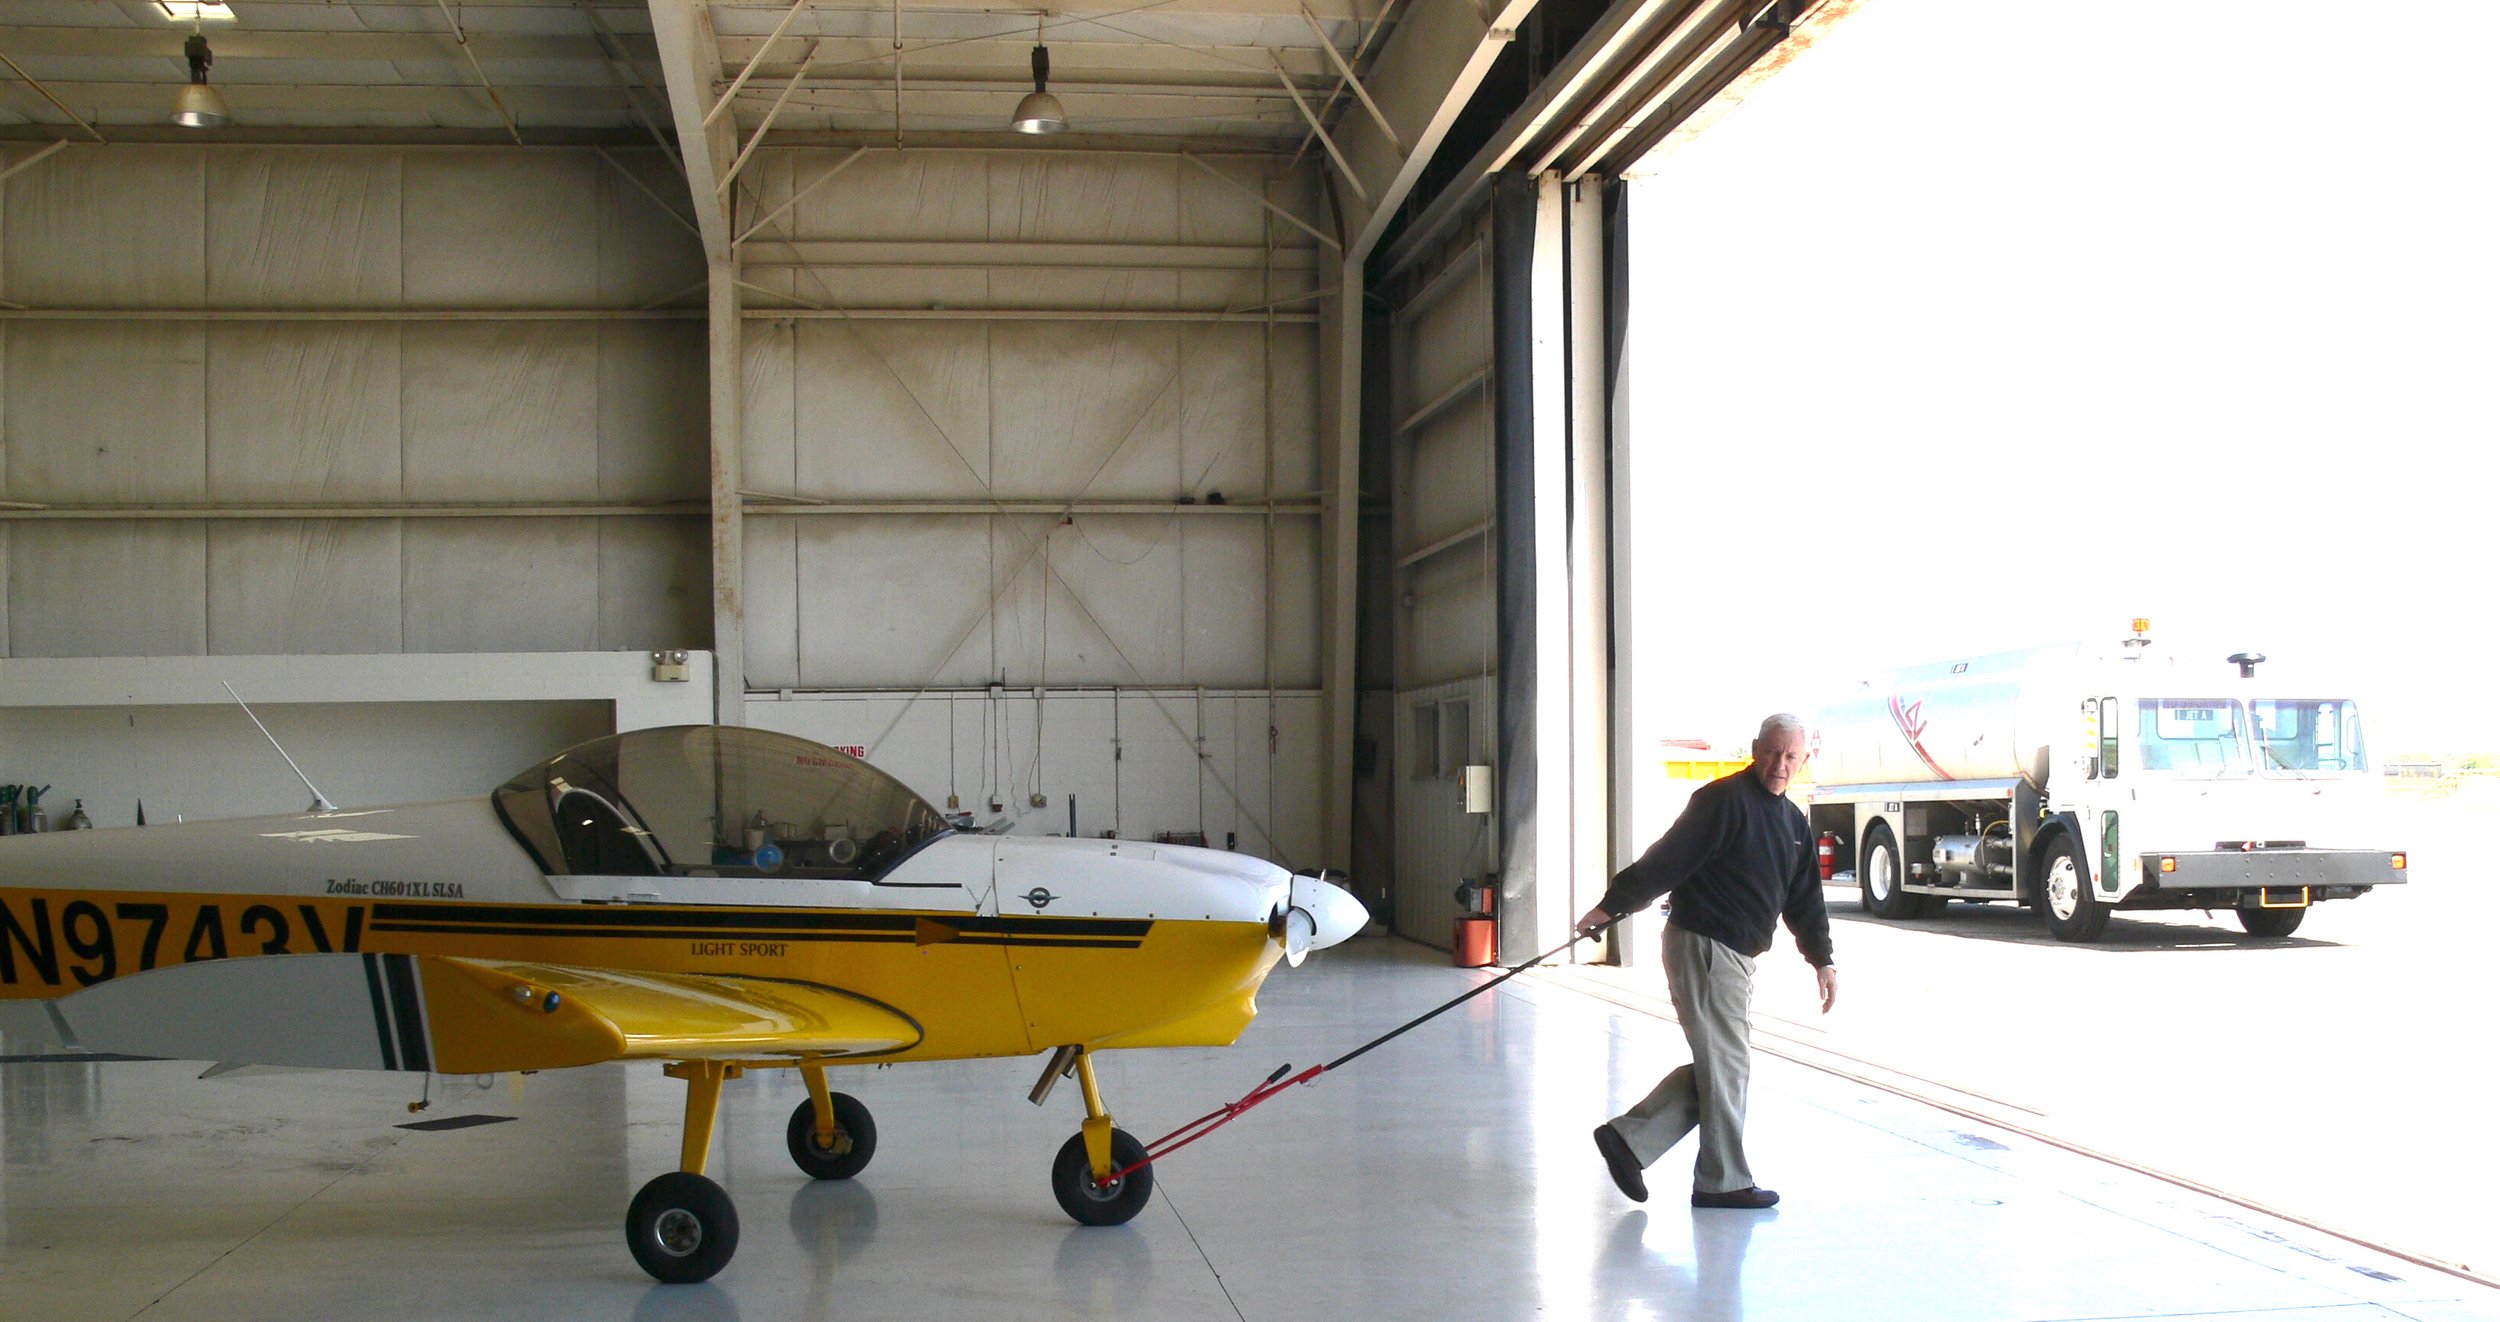  Darrel pulling the lightweight Zodiac plane out for a ride. 